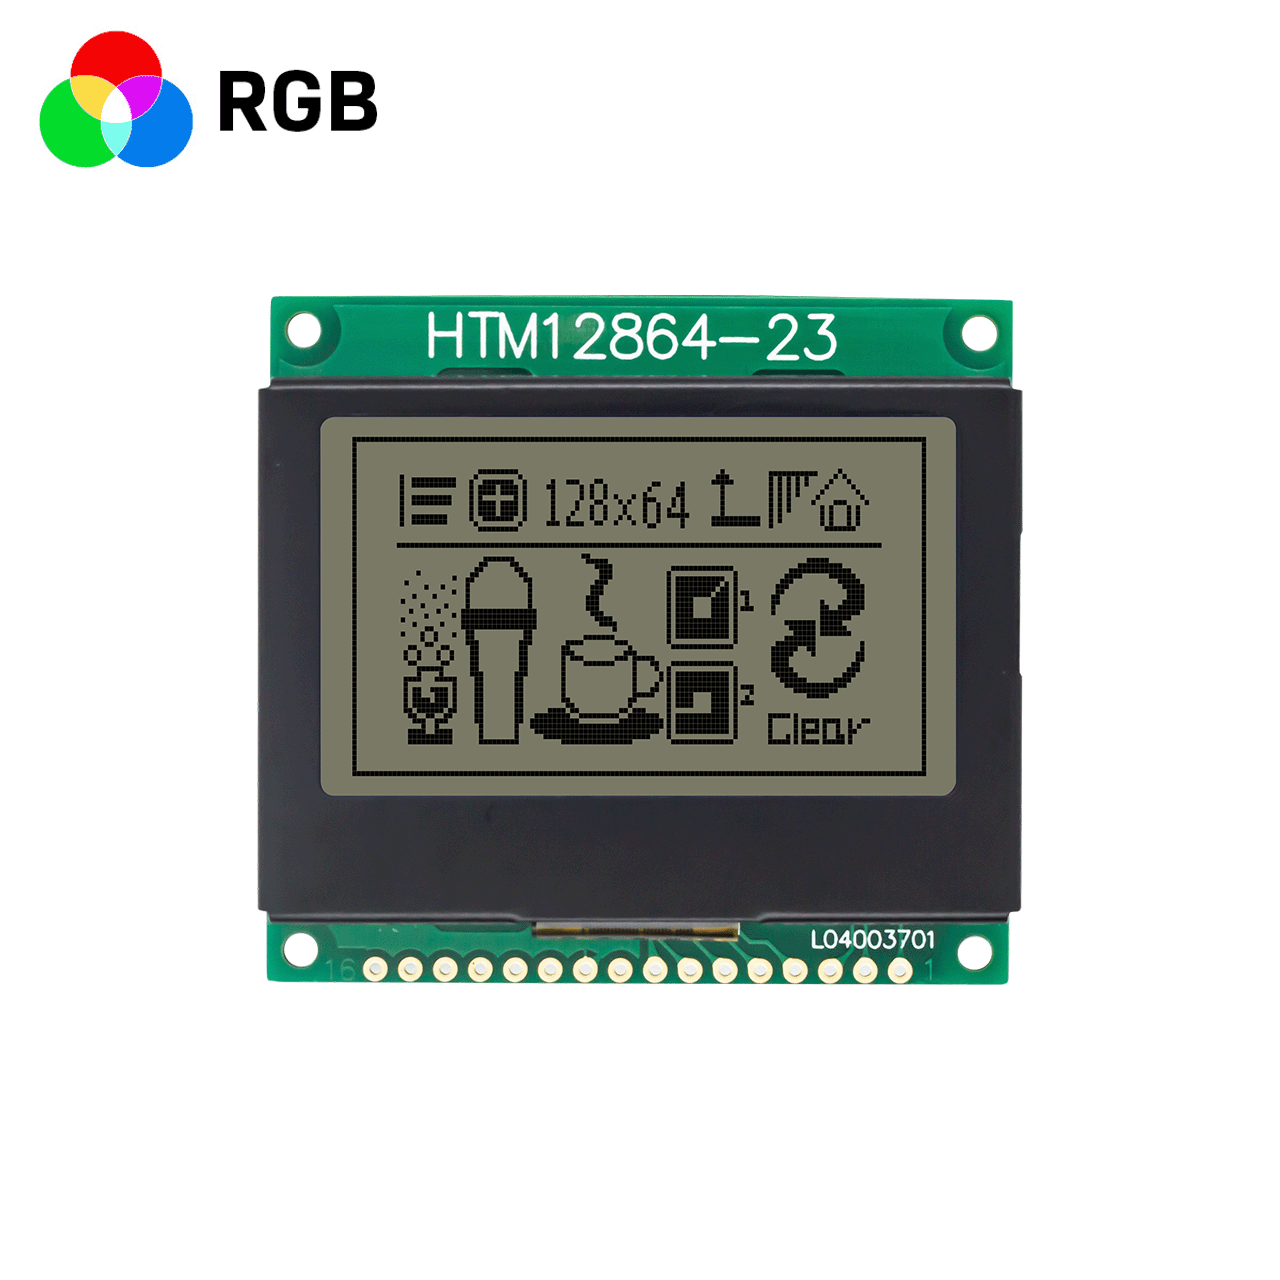 2.0-inch LCD12864 graphic LCD screen/LCM128x64 graphic dot matrix module/RGB red, green and blue backlight/Chinese, English, Russian and Japanese character library